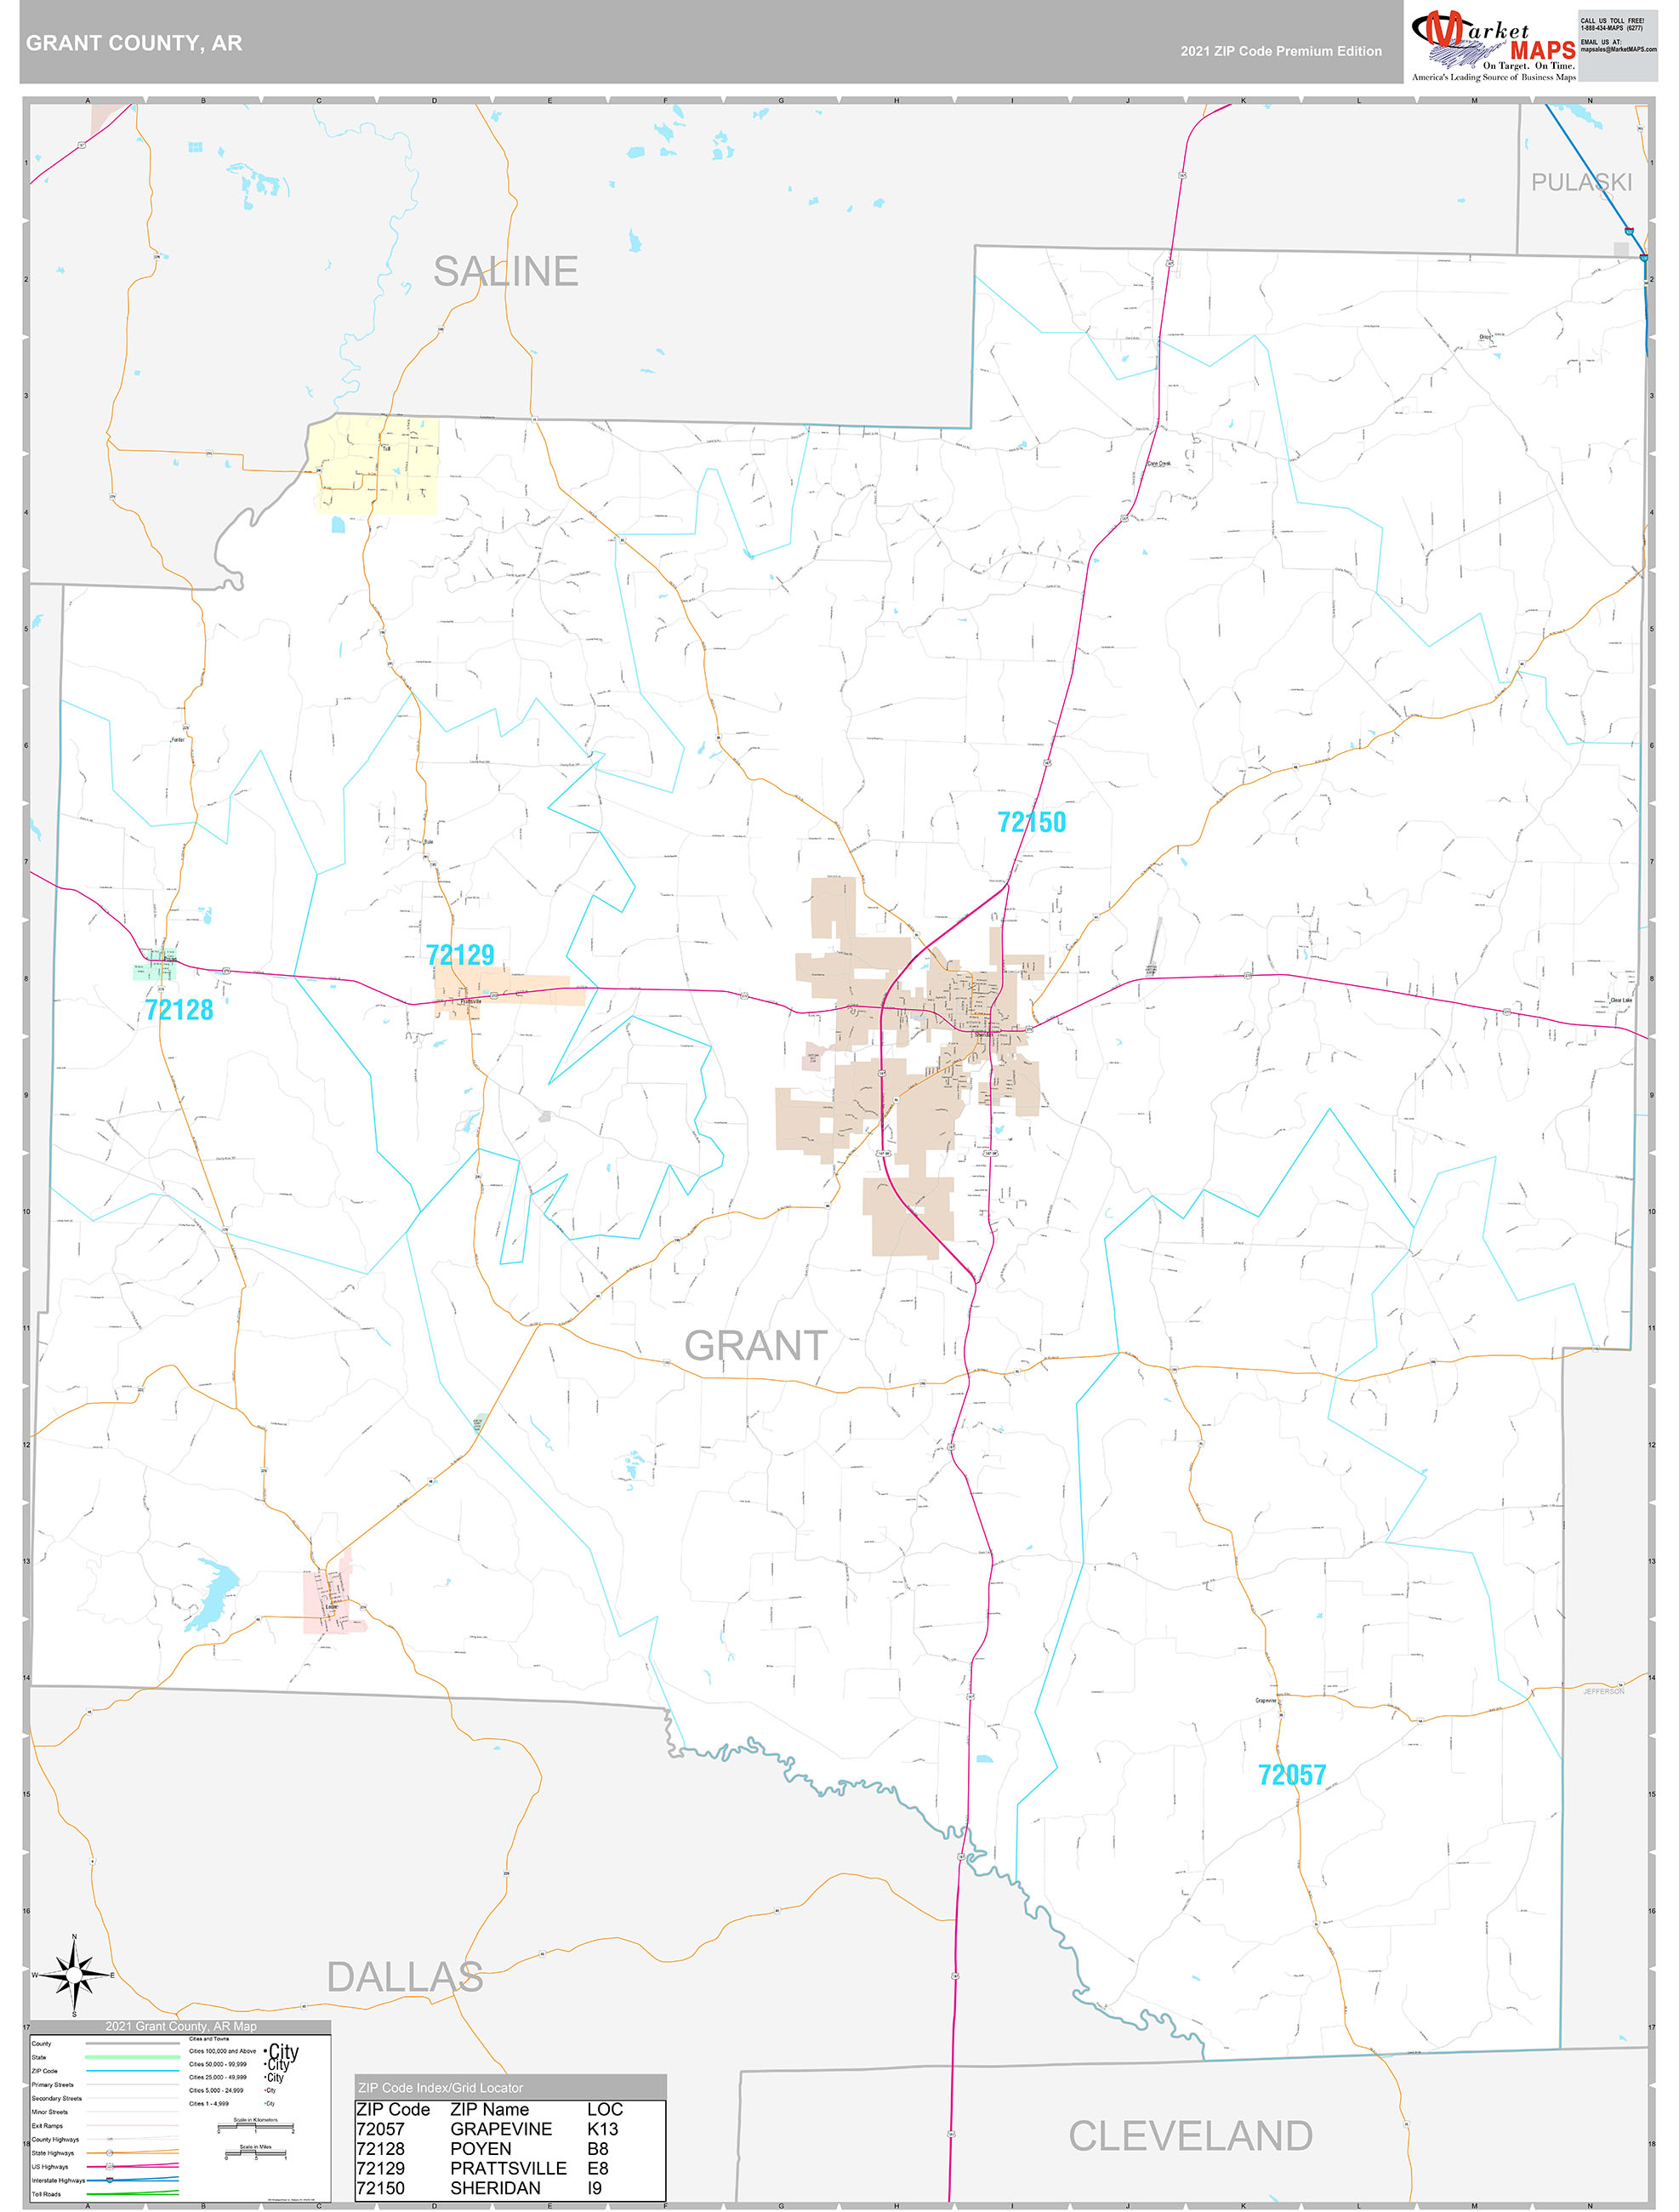 Grant County, AR Wall Map Premium Style by MarketMAPS